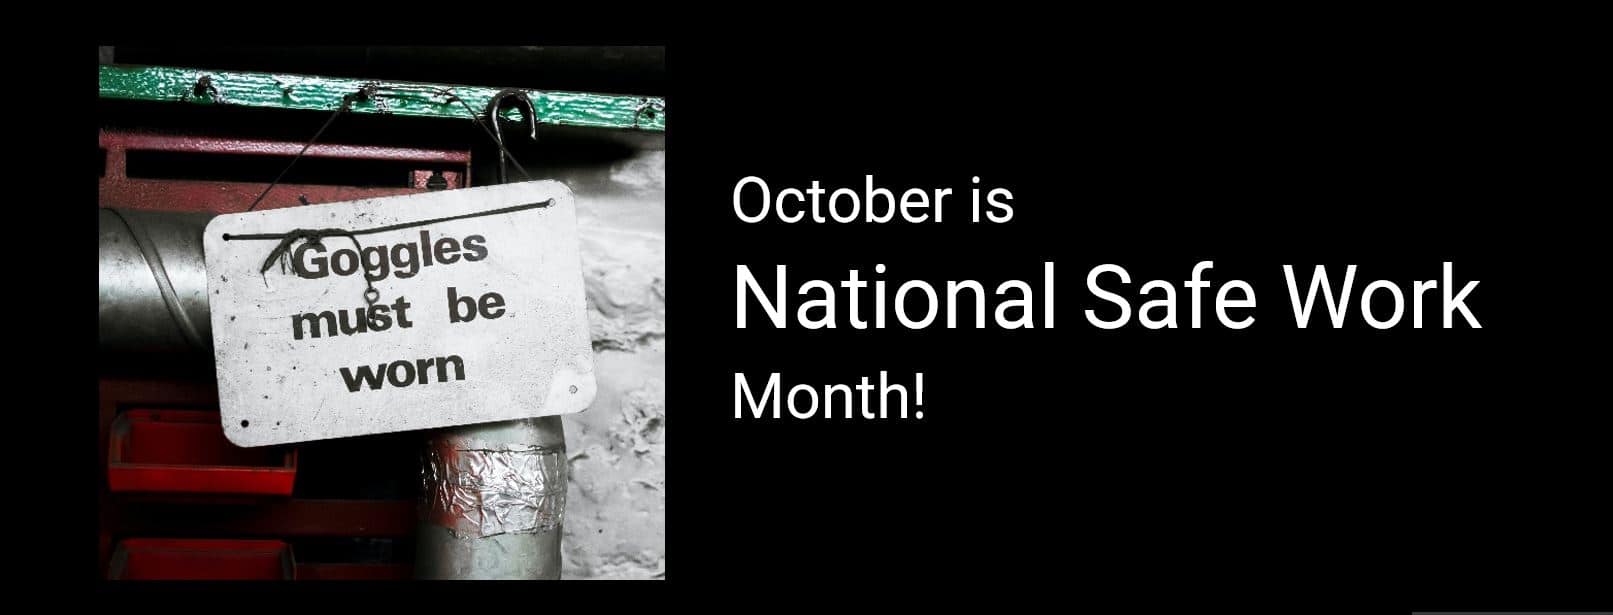 A sign reading "Goggles must be worn" hangs on metal pipes. The text "October is National Safe Work Month!" appears to the right on a black background, emphasizing the importance of maintaining a safe work environment.